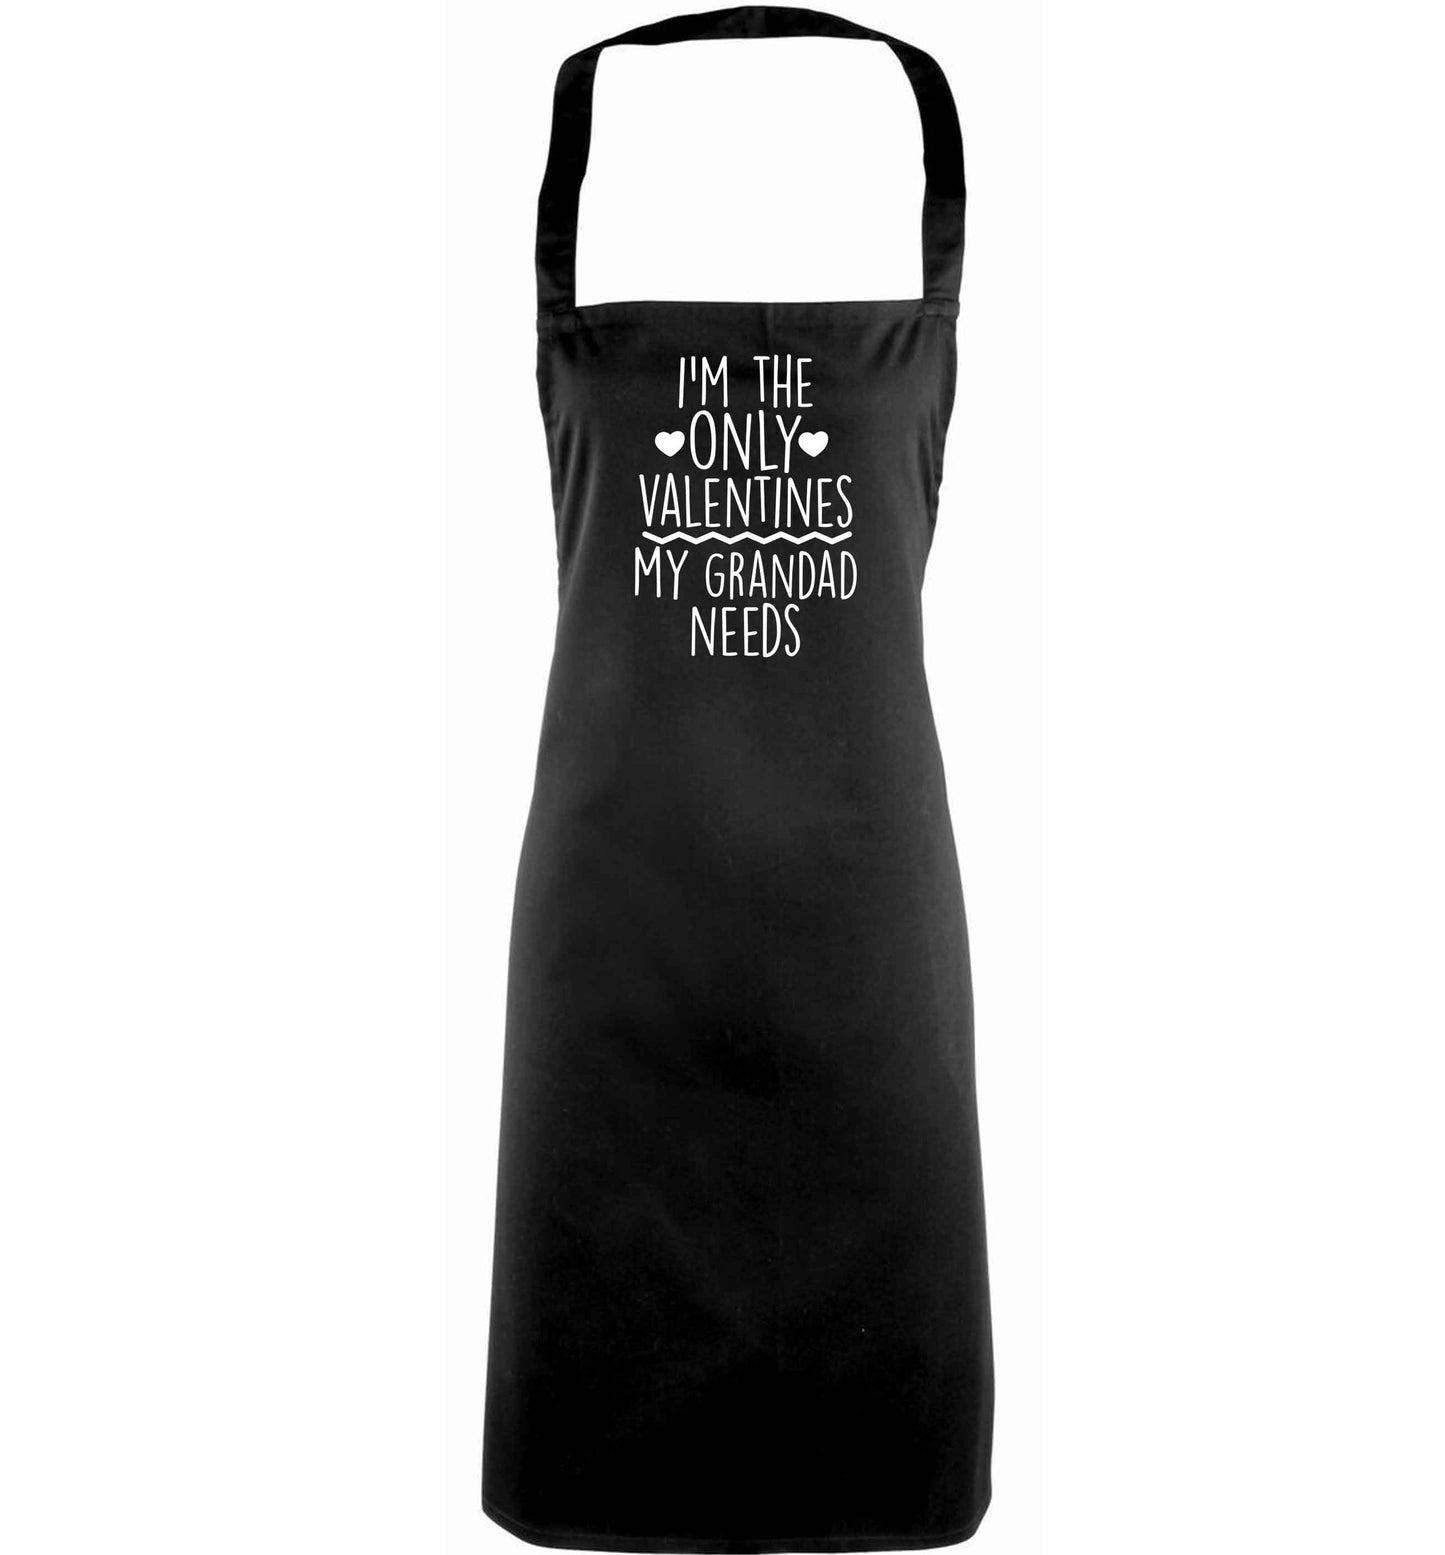 I'm the only valentines my grandad needs adults black apron